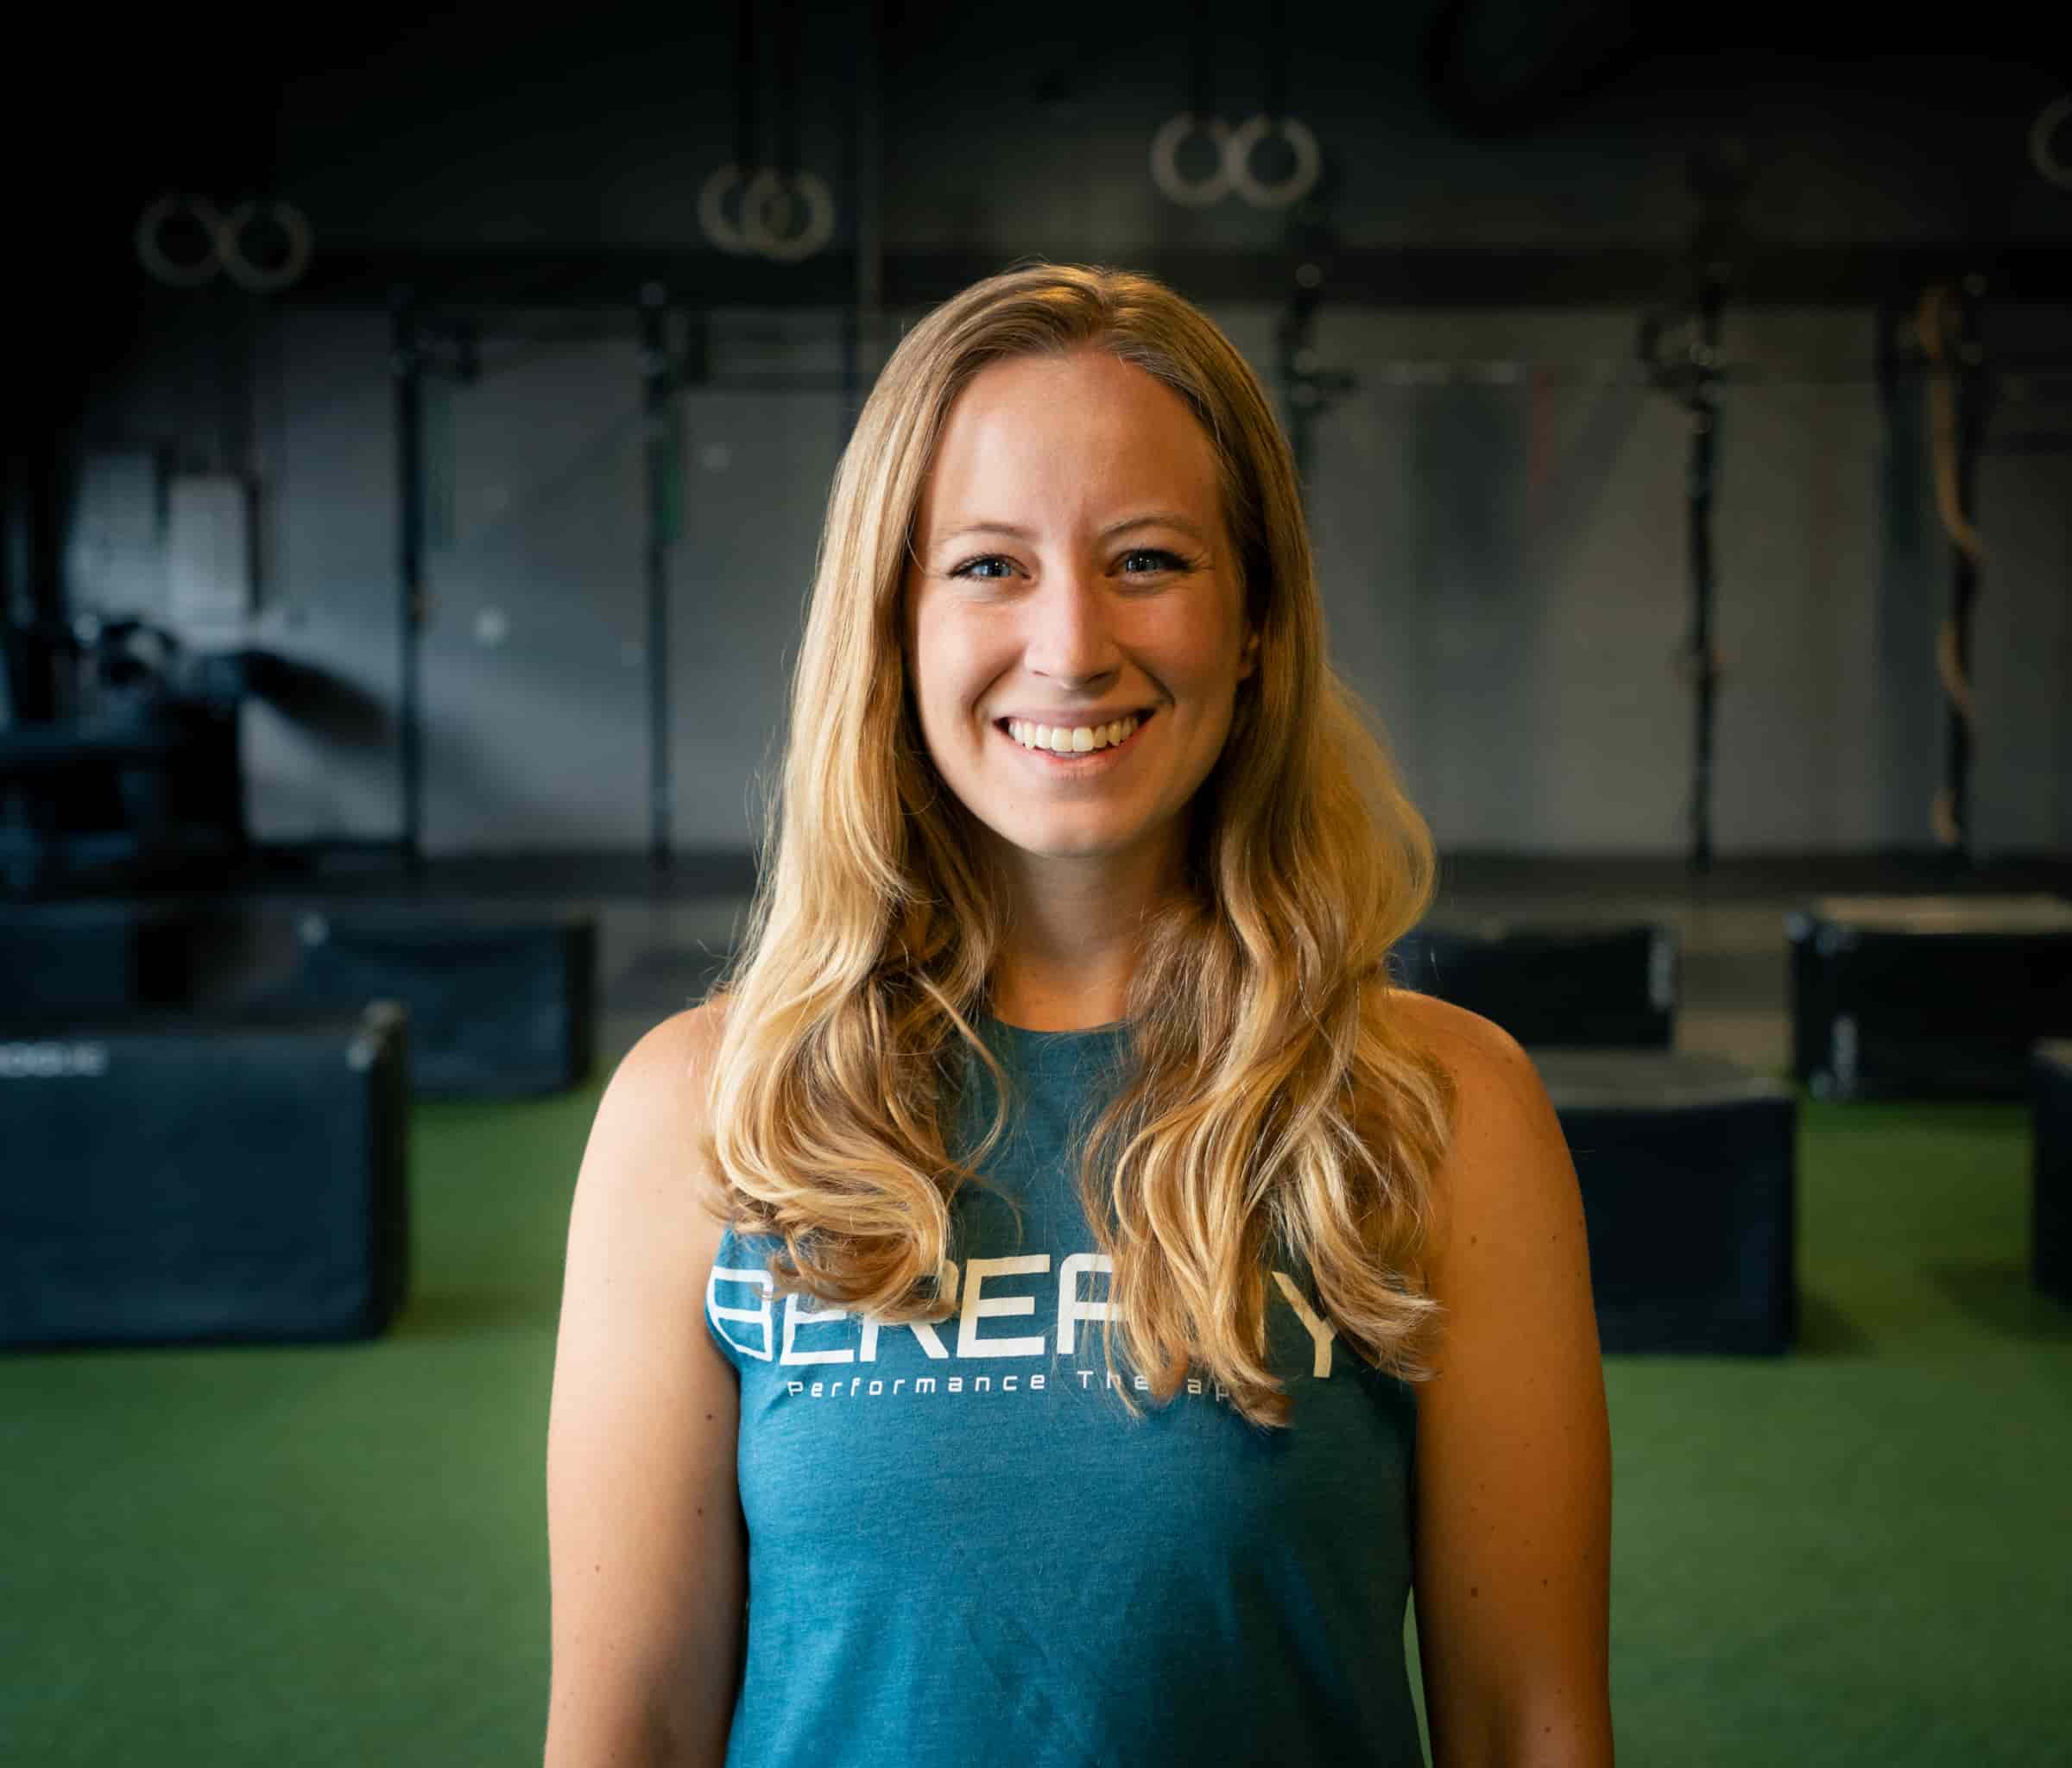 A smiling woman with long blonde hair, wearing a blue tank top, stands in a gym with exercise equipment in the background.